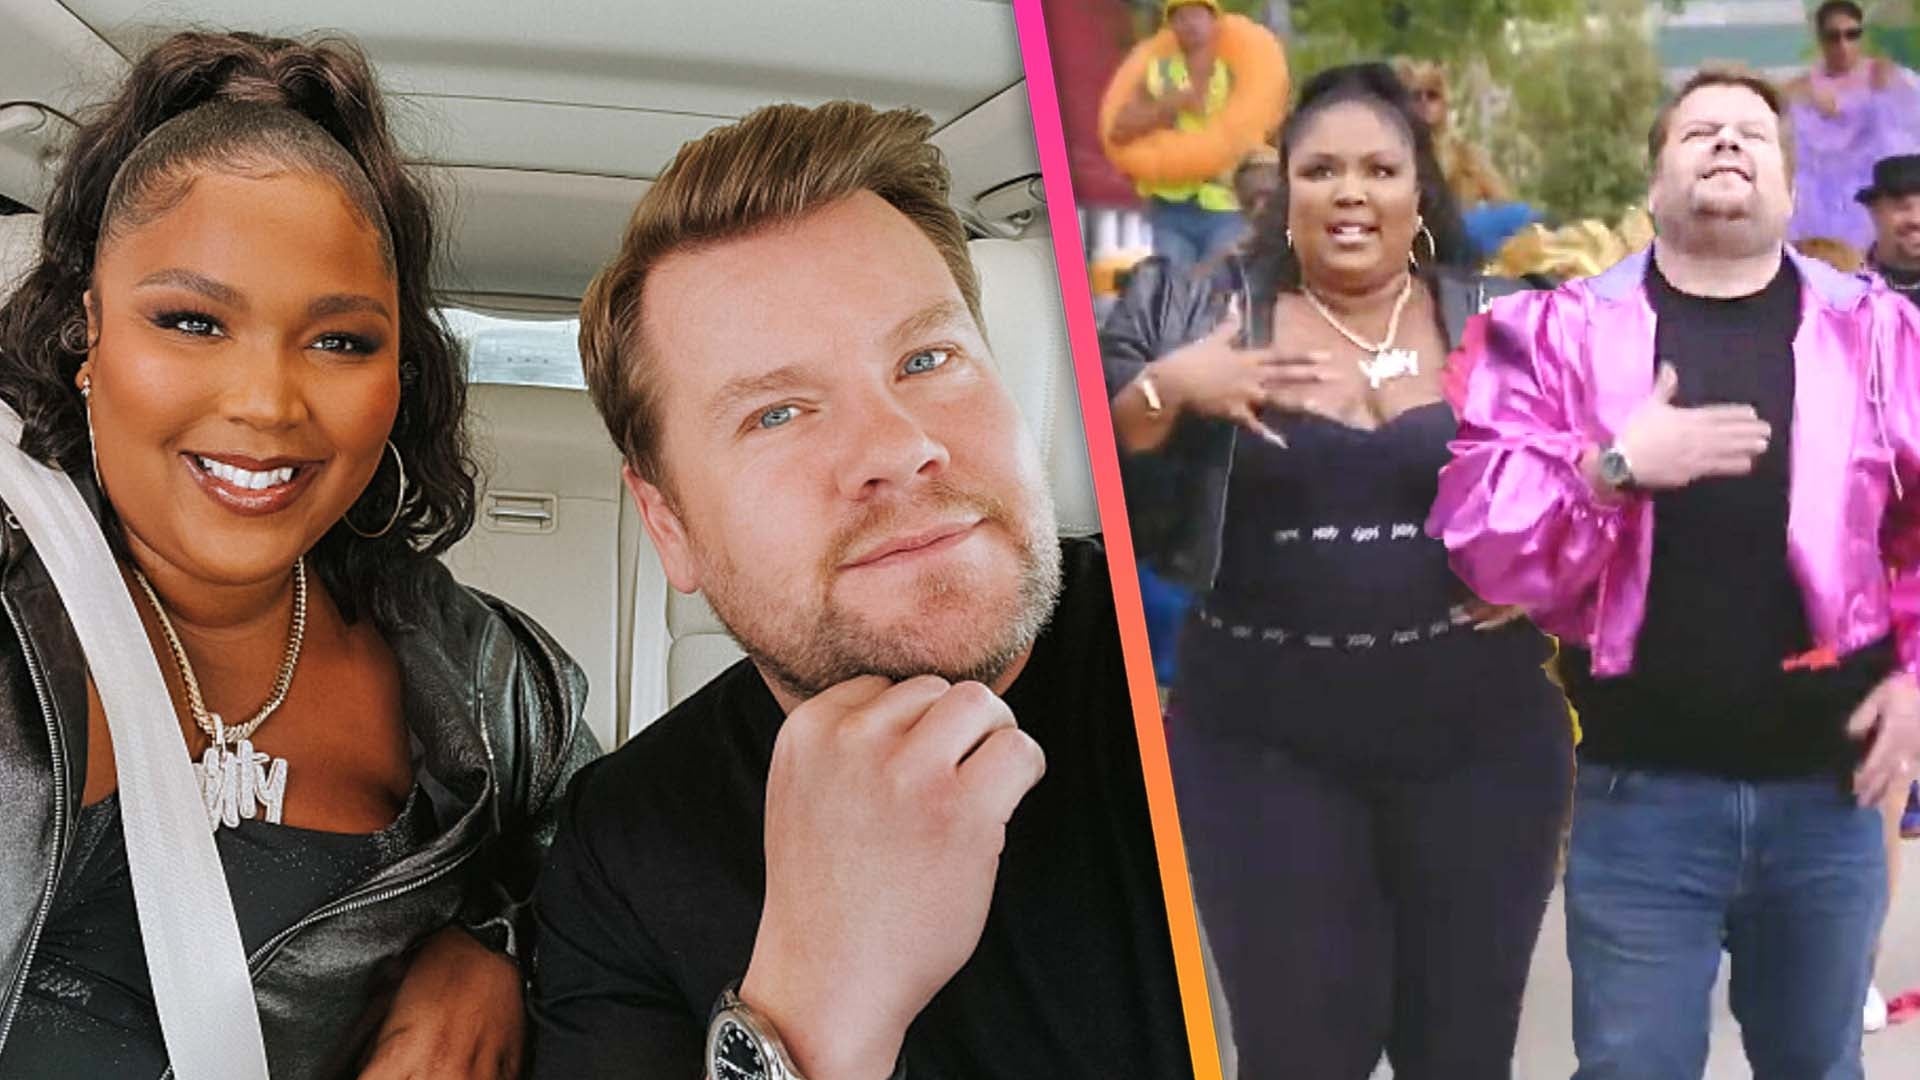 Lizzo Pulls Out TikTok Moves, Plays the Flute and Talks Beyoncè in 'Carpool Karaoke' Debut 